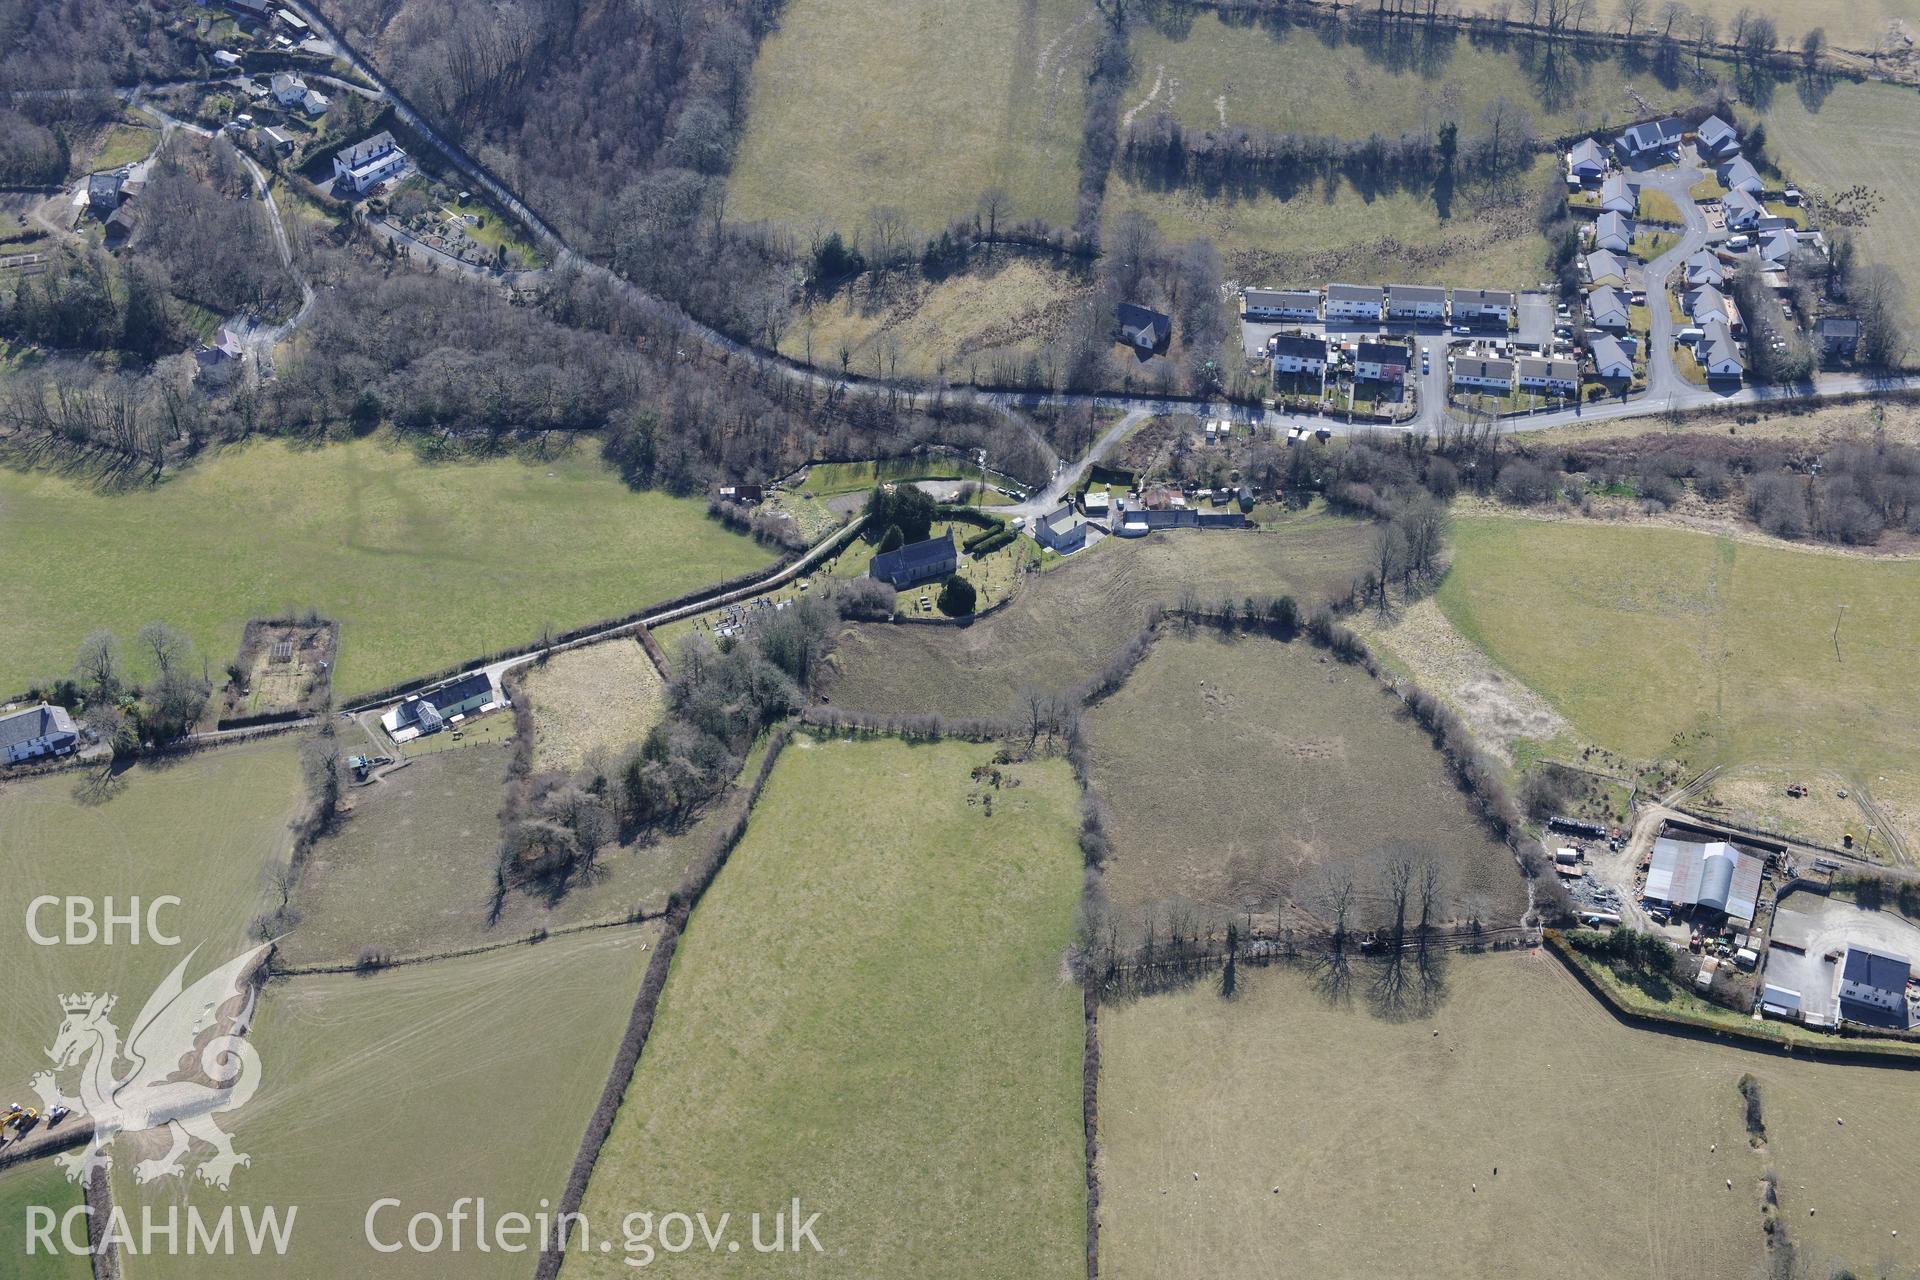 St Sulien's church, in the village of Silian, north of Lampeter. Oblique aerial photograph taken during the Royal Commission?s programme of archaeological aerial reconnaissance by Toby Driver on 2nd April 2015.